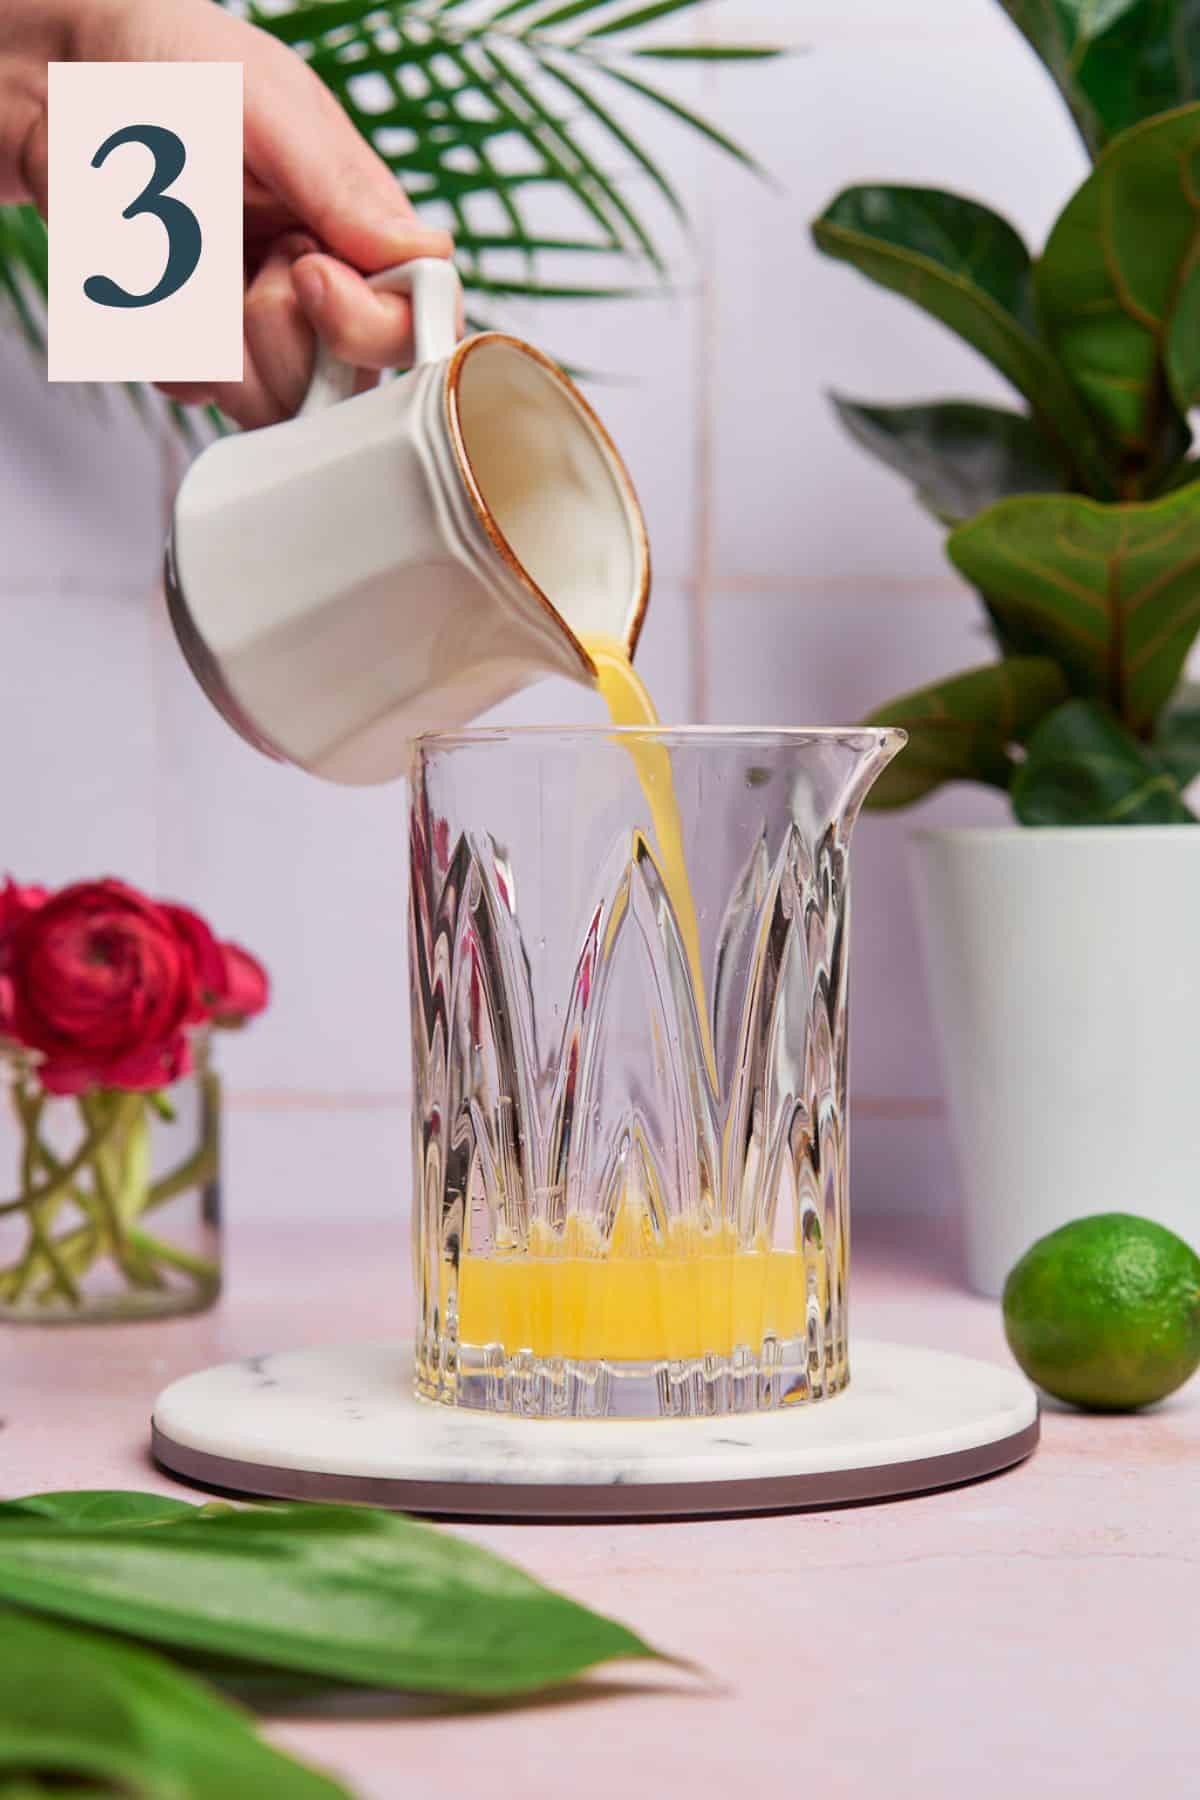 Pineapple juice being poured into cocktail mixer.